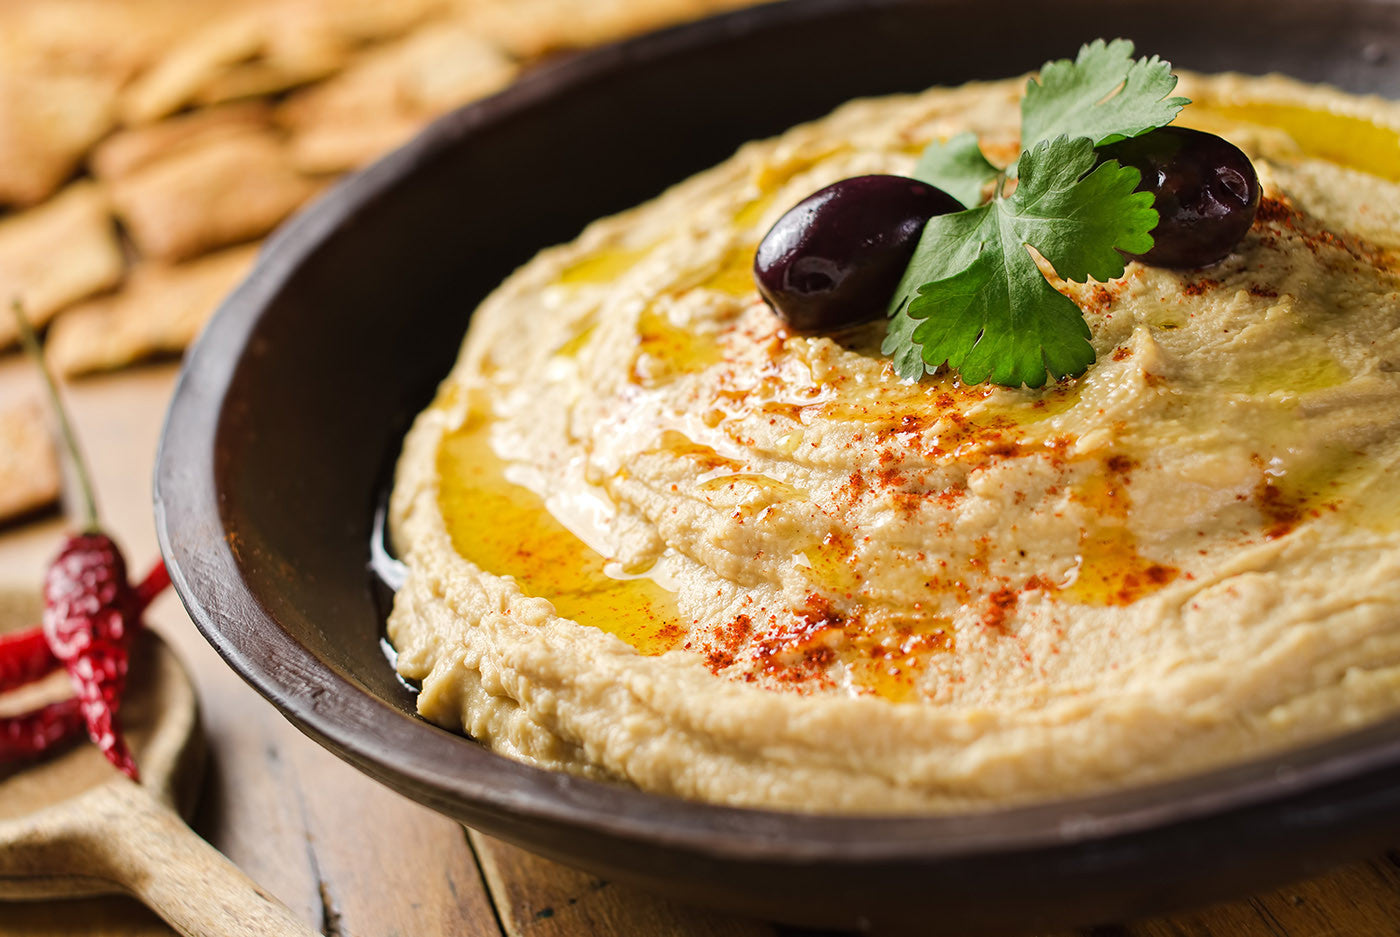 Slow-Cooked Hummus Recipe for a Healthy Family